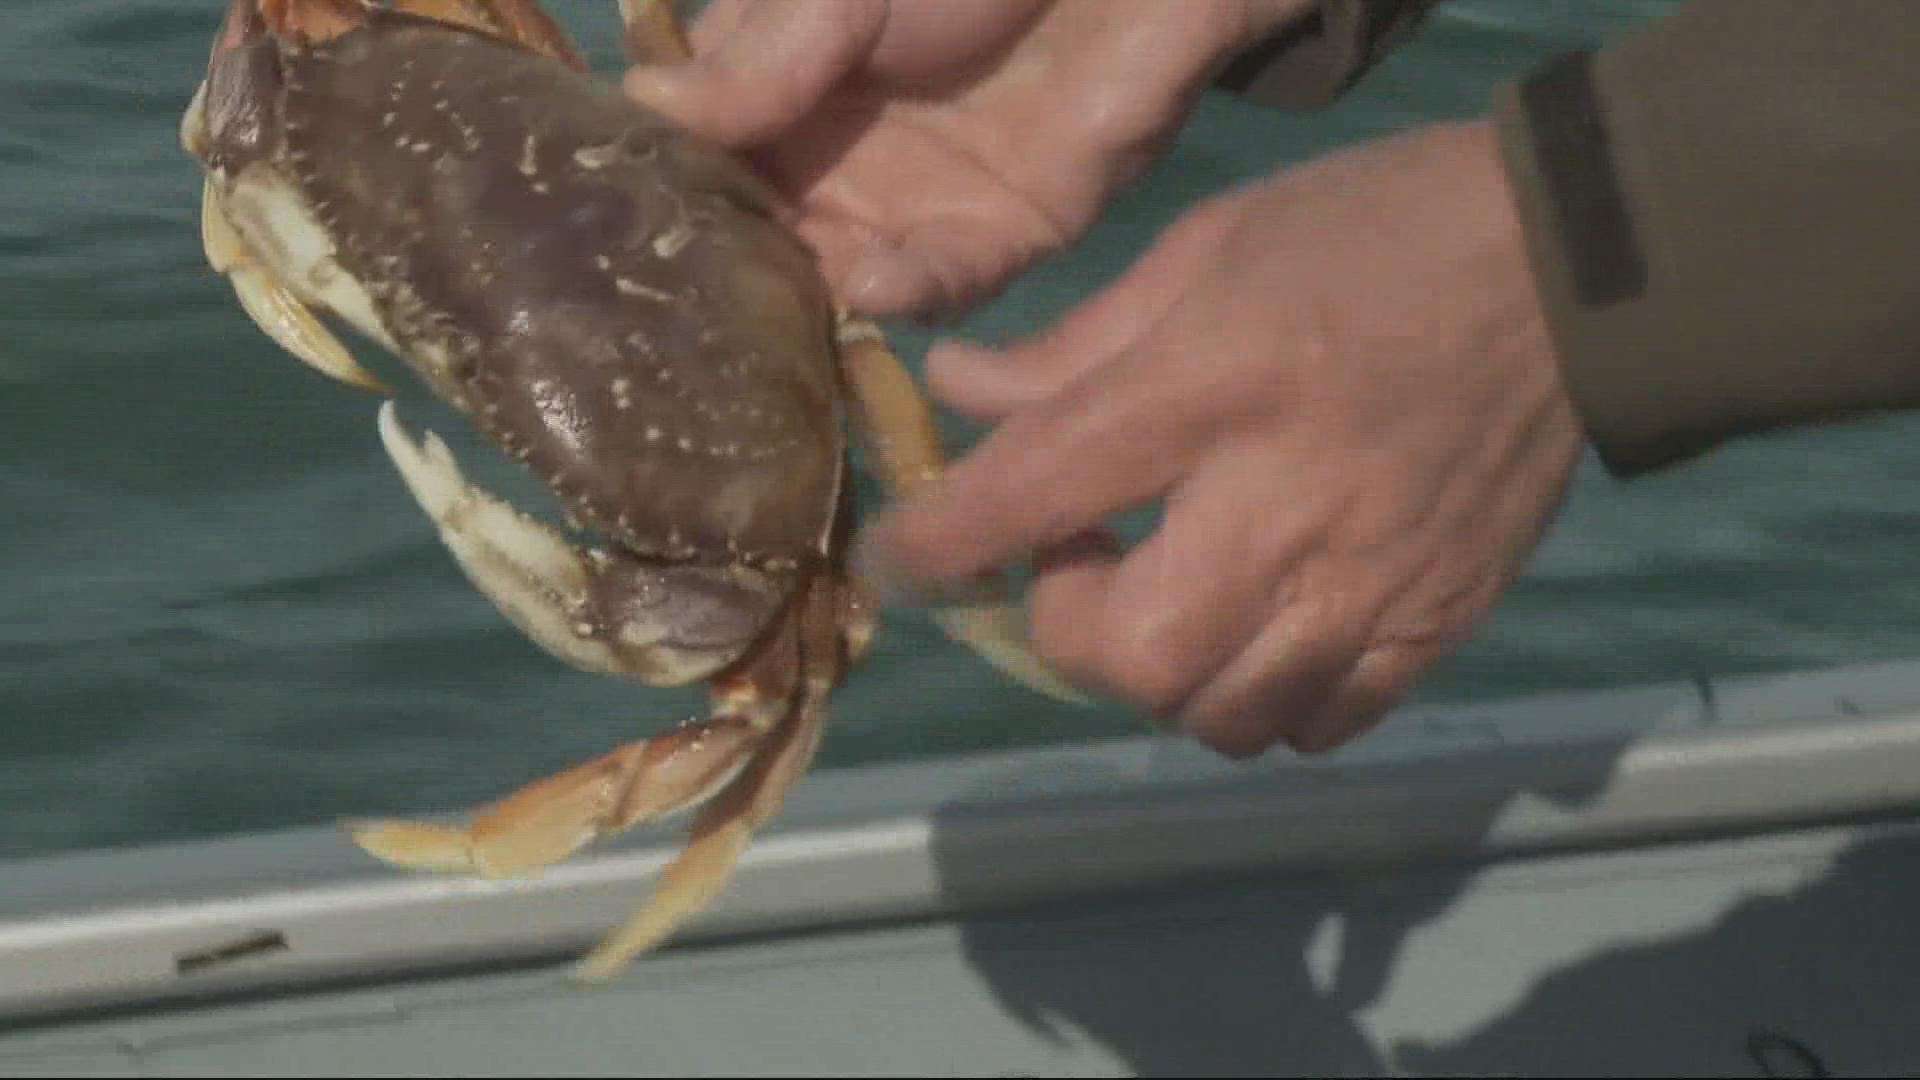 After starting on time for the first time in years, Oregon's Dungeness crab season is bringing in a record-breaking haul.